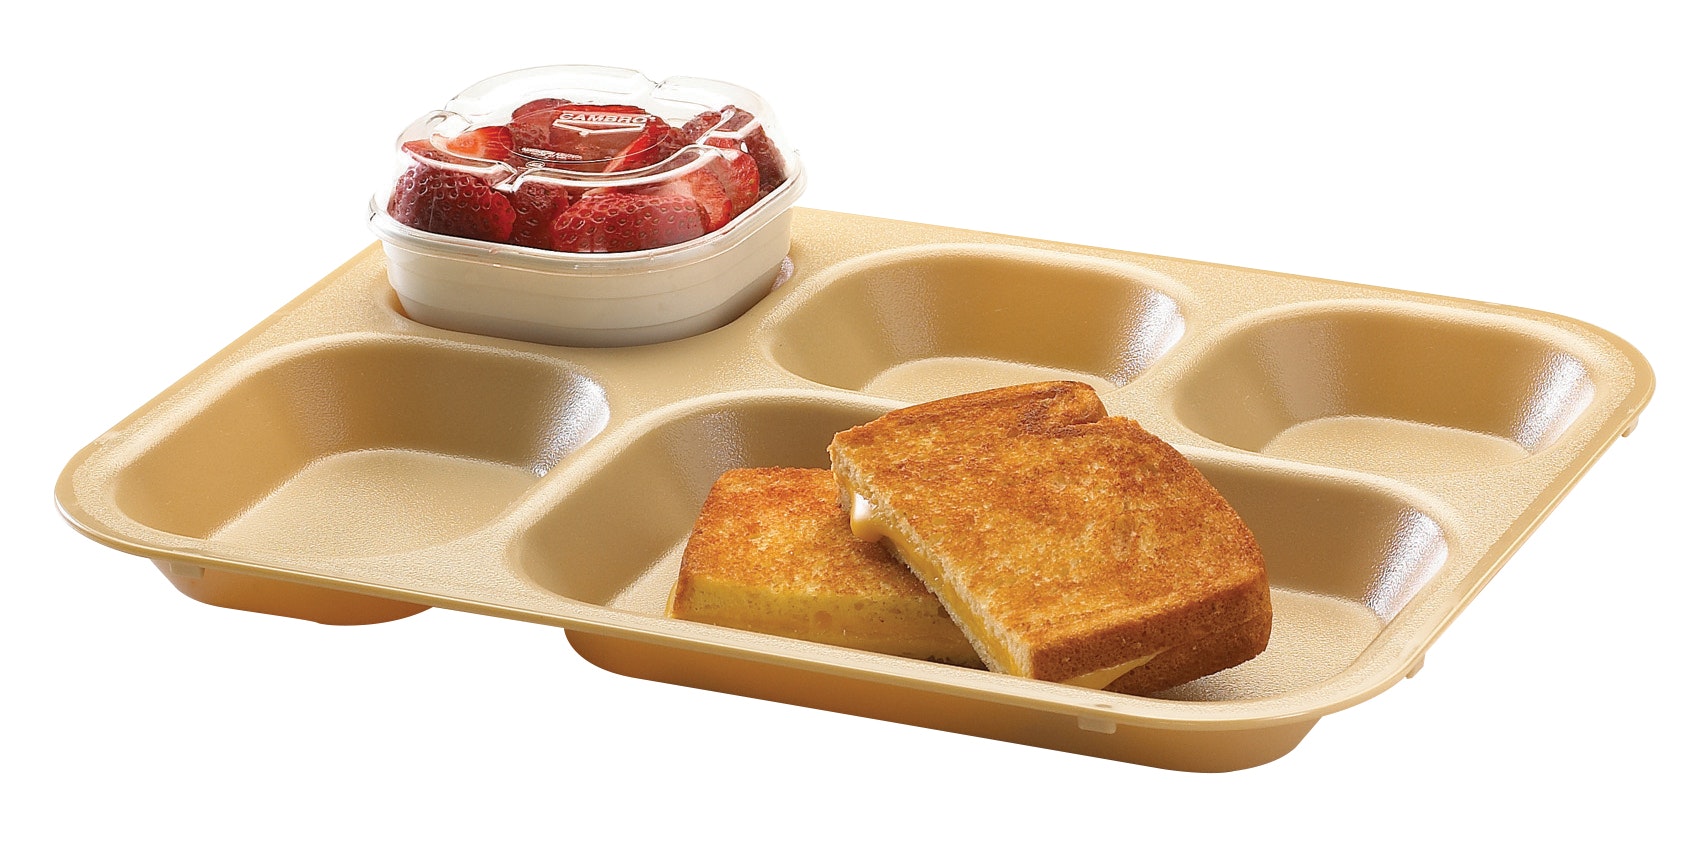 Cambro 10146DCW133 cafeteria school fast food trays